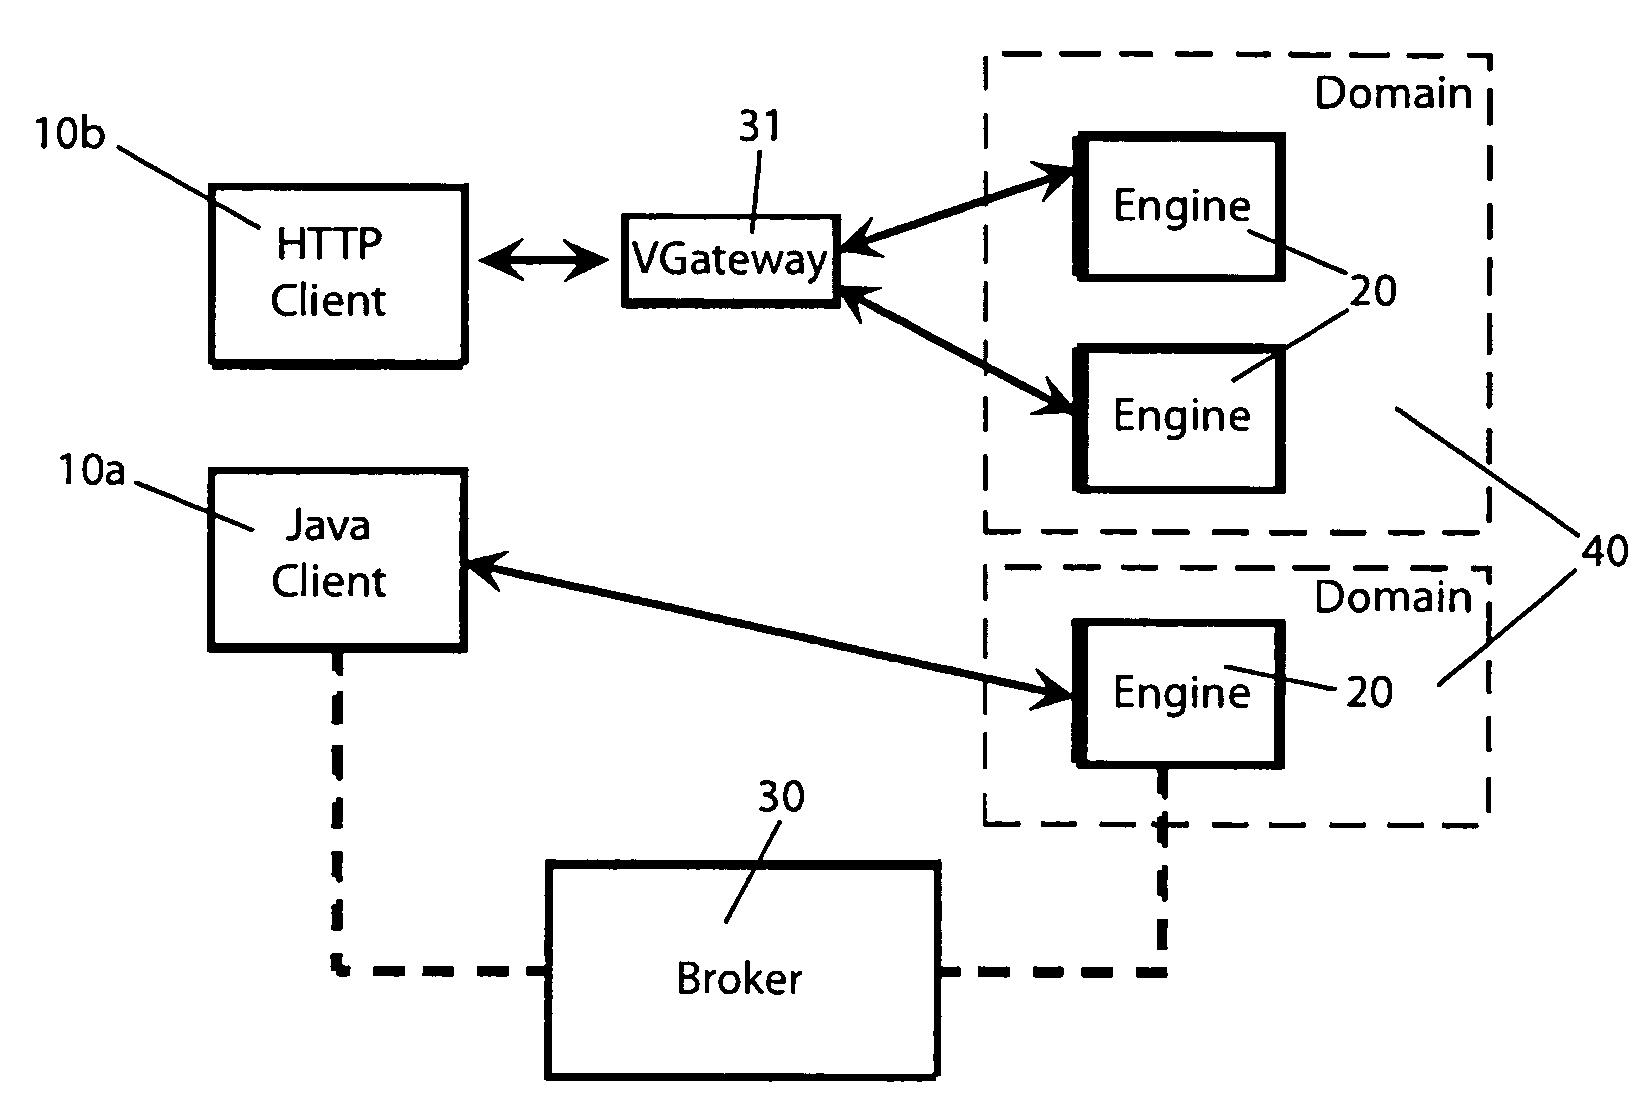 Method for allocating shared computing infrastructure for application server-based deployments